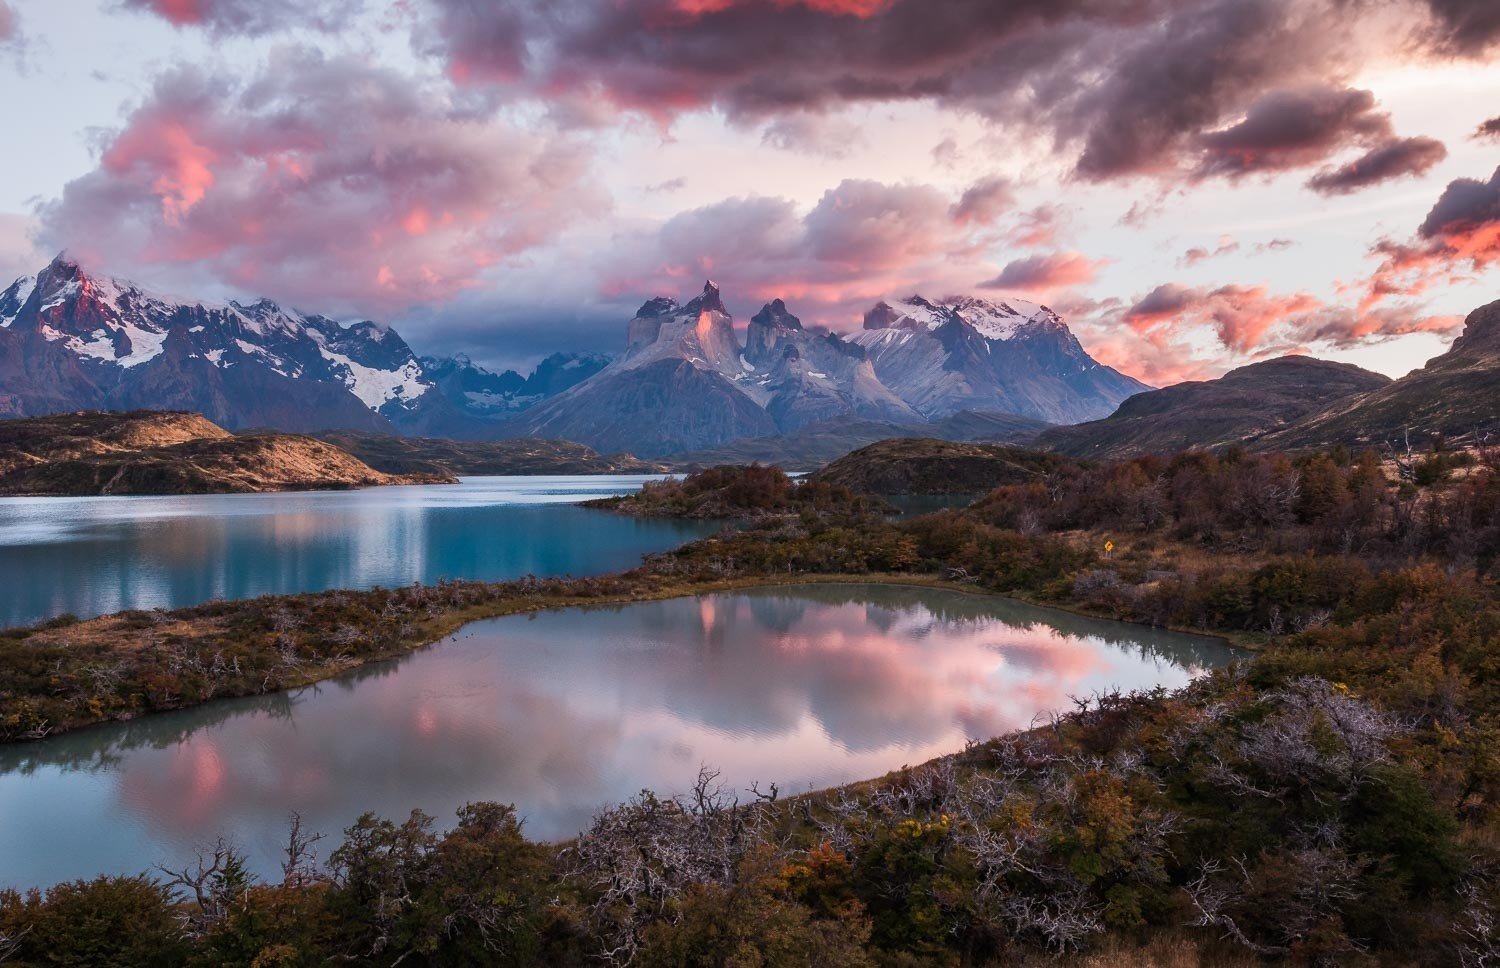 nature, Landscape, Photography, Sunrise, Mountains, Lake, Shrubs, Fall, Snowy peak, Clouds, Sunlight, Torres del Paine, Chile, National park Wallpaper